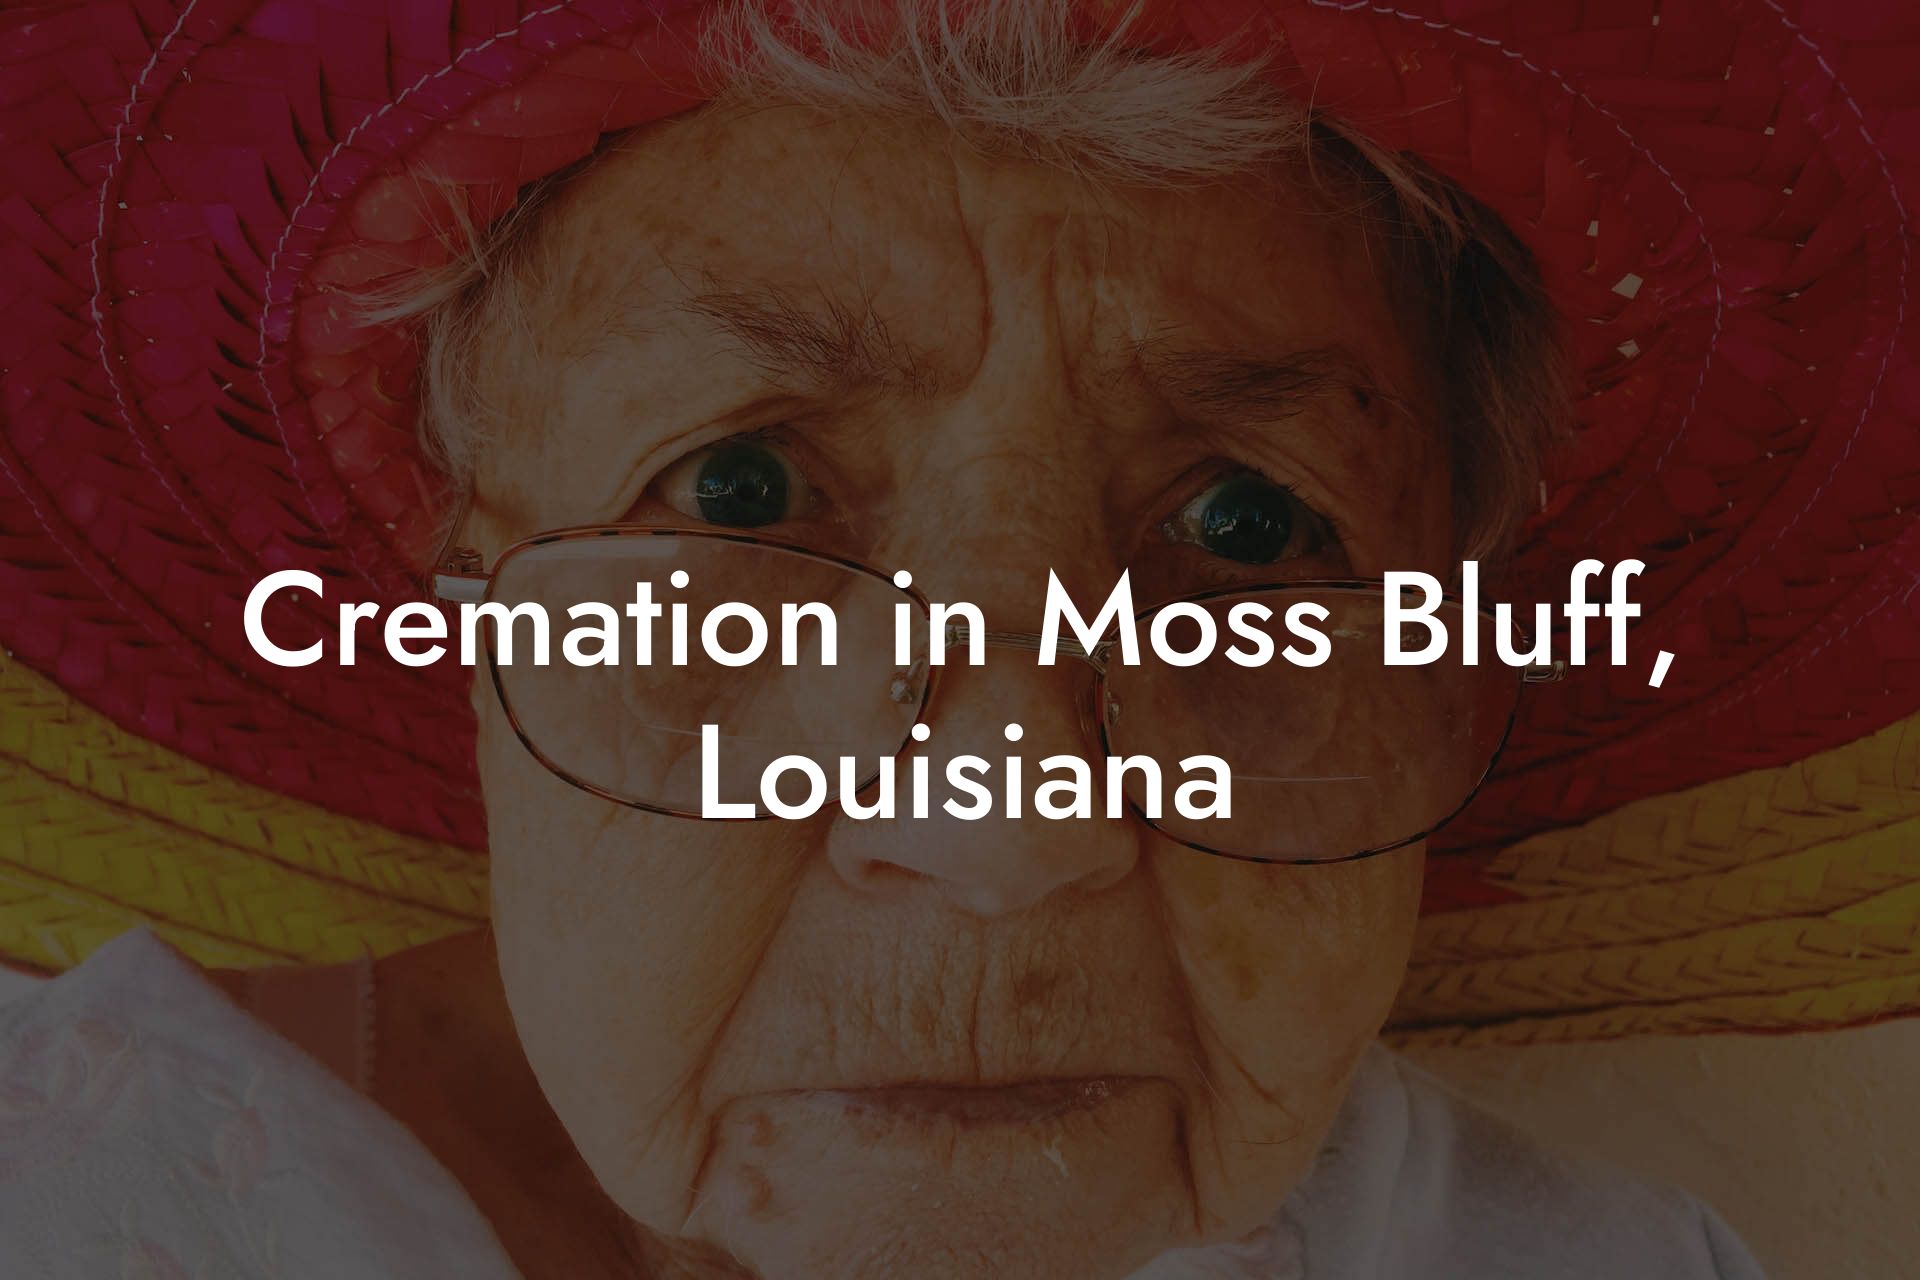 Cremation in Moss Bluff, Louisiana